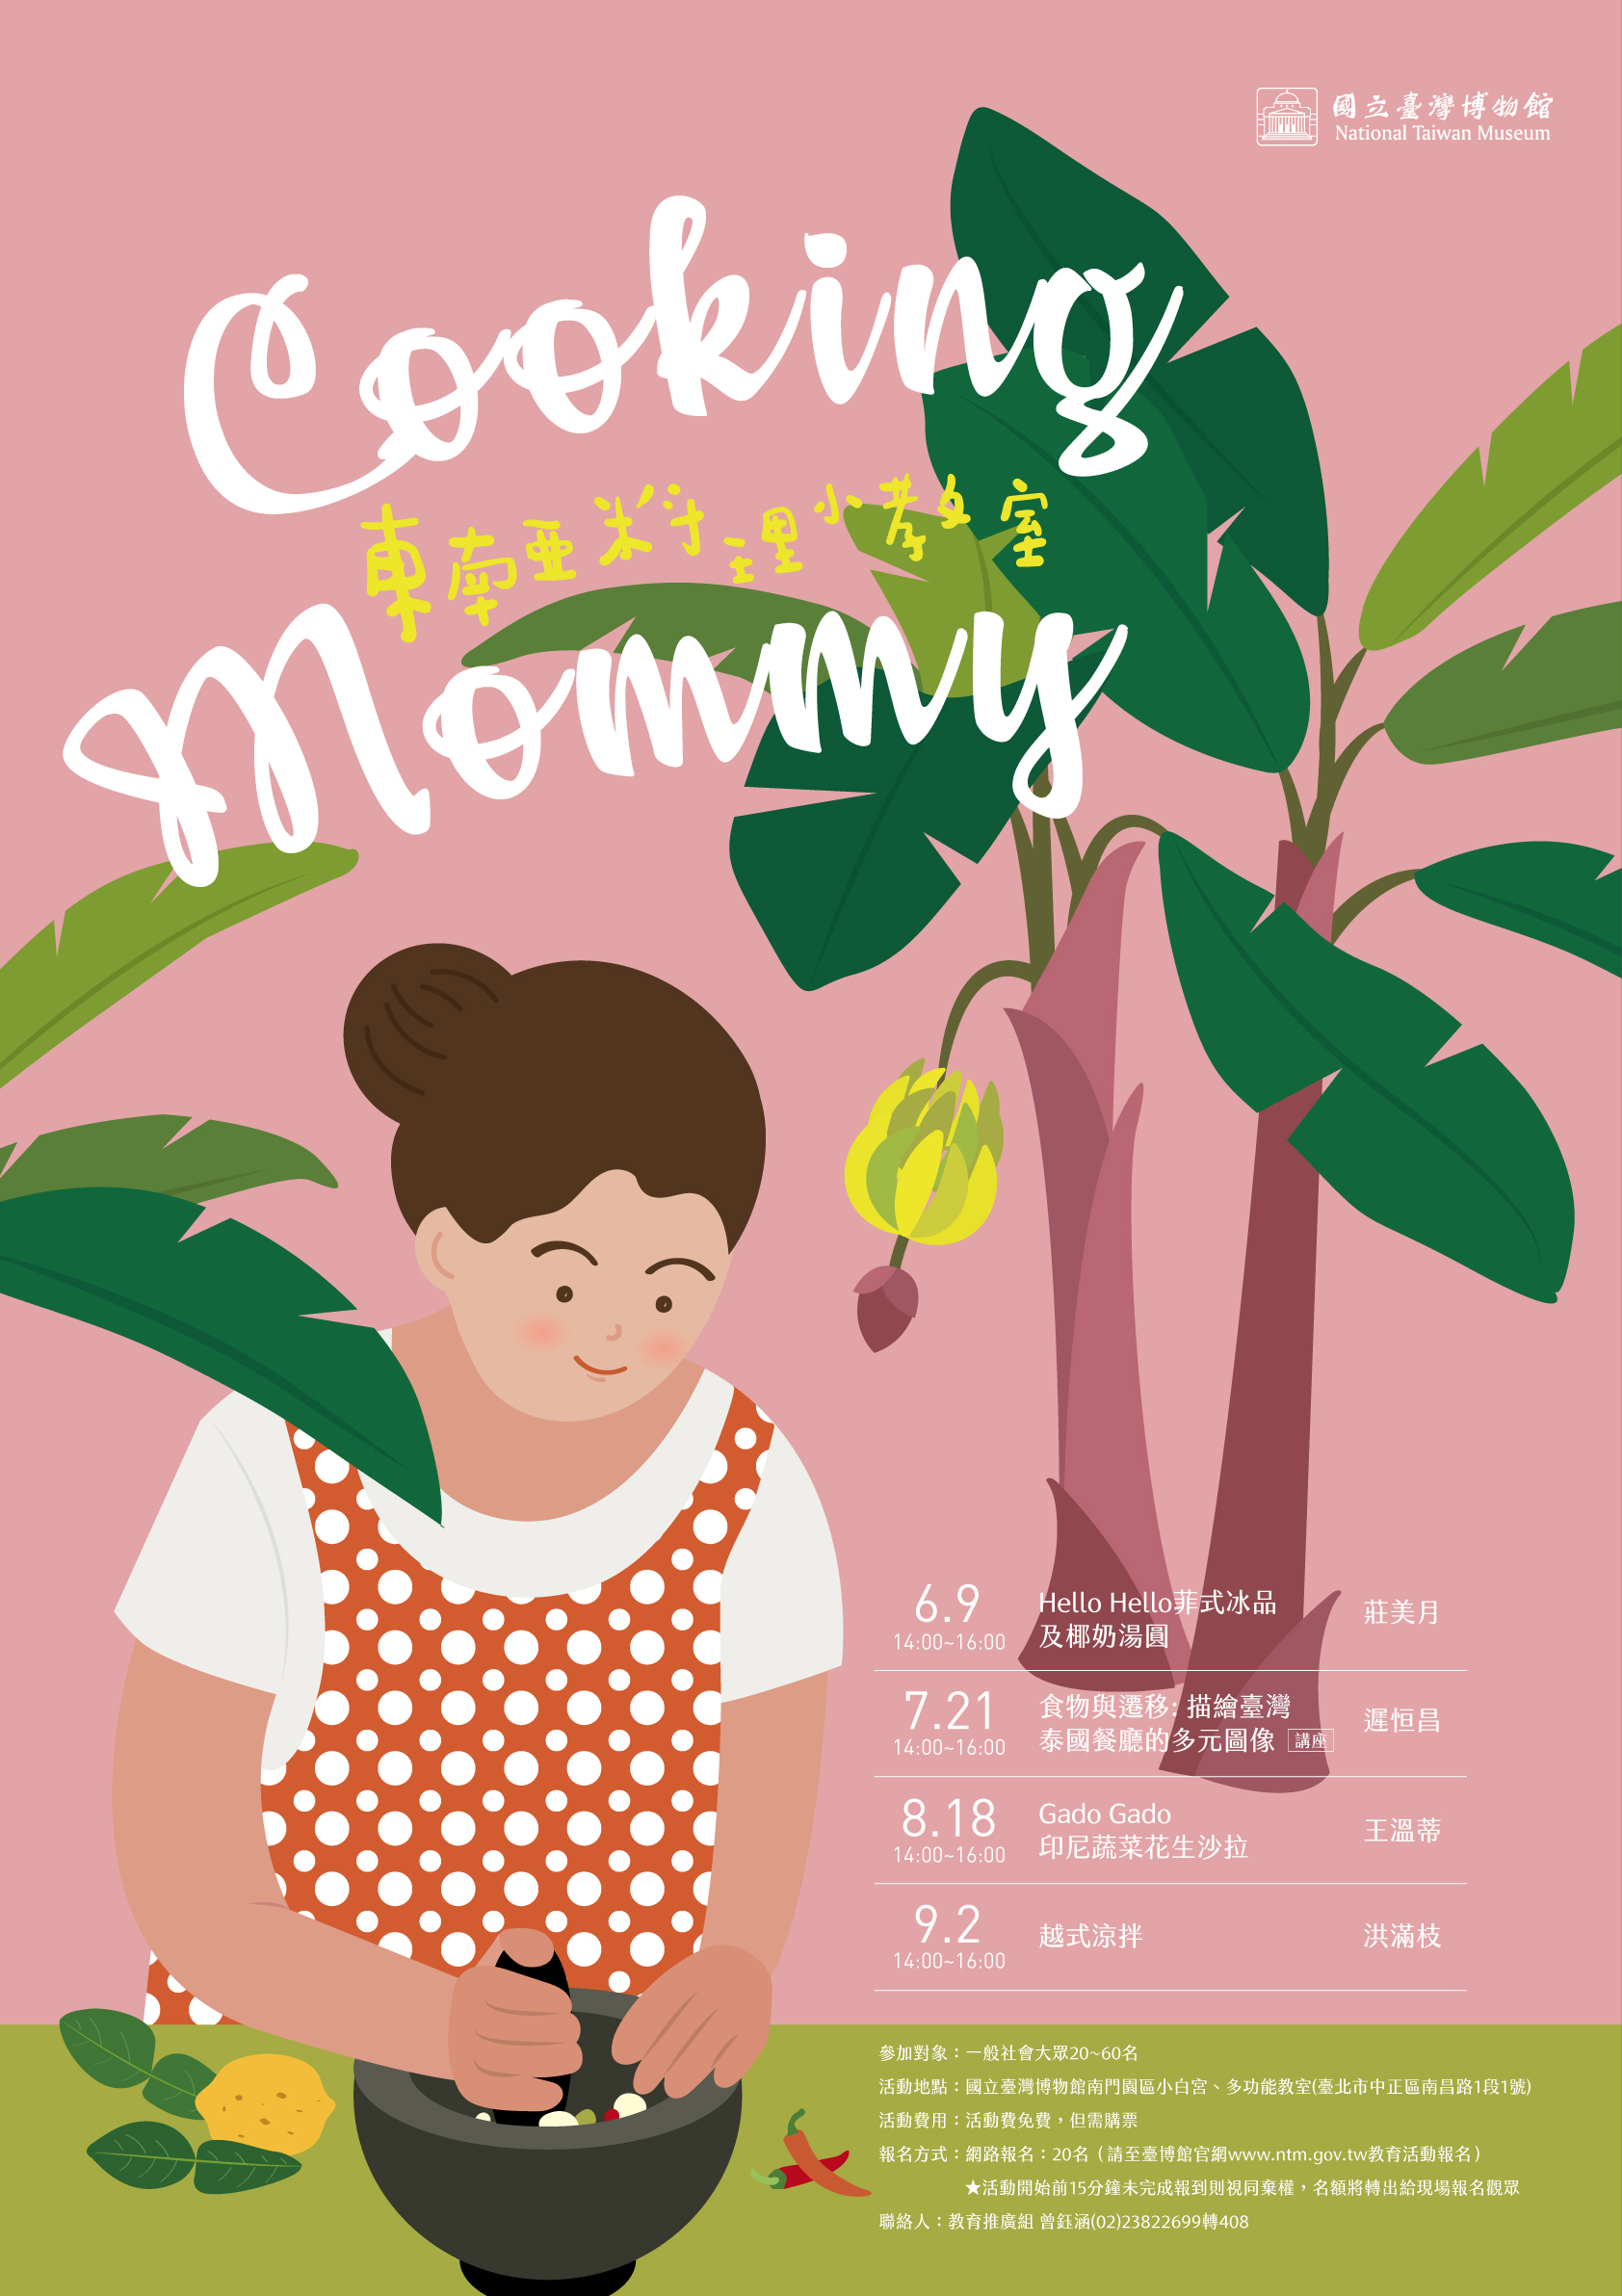 Cooking Mommy:東南亞料理小教室